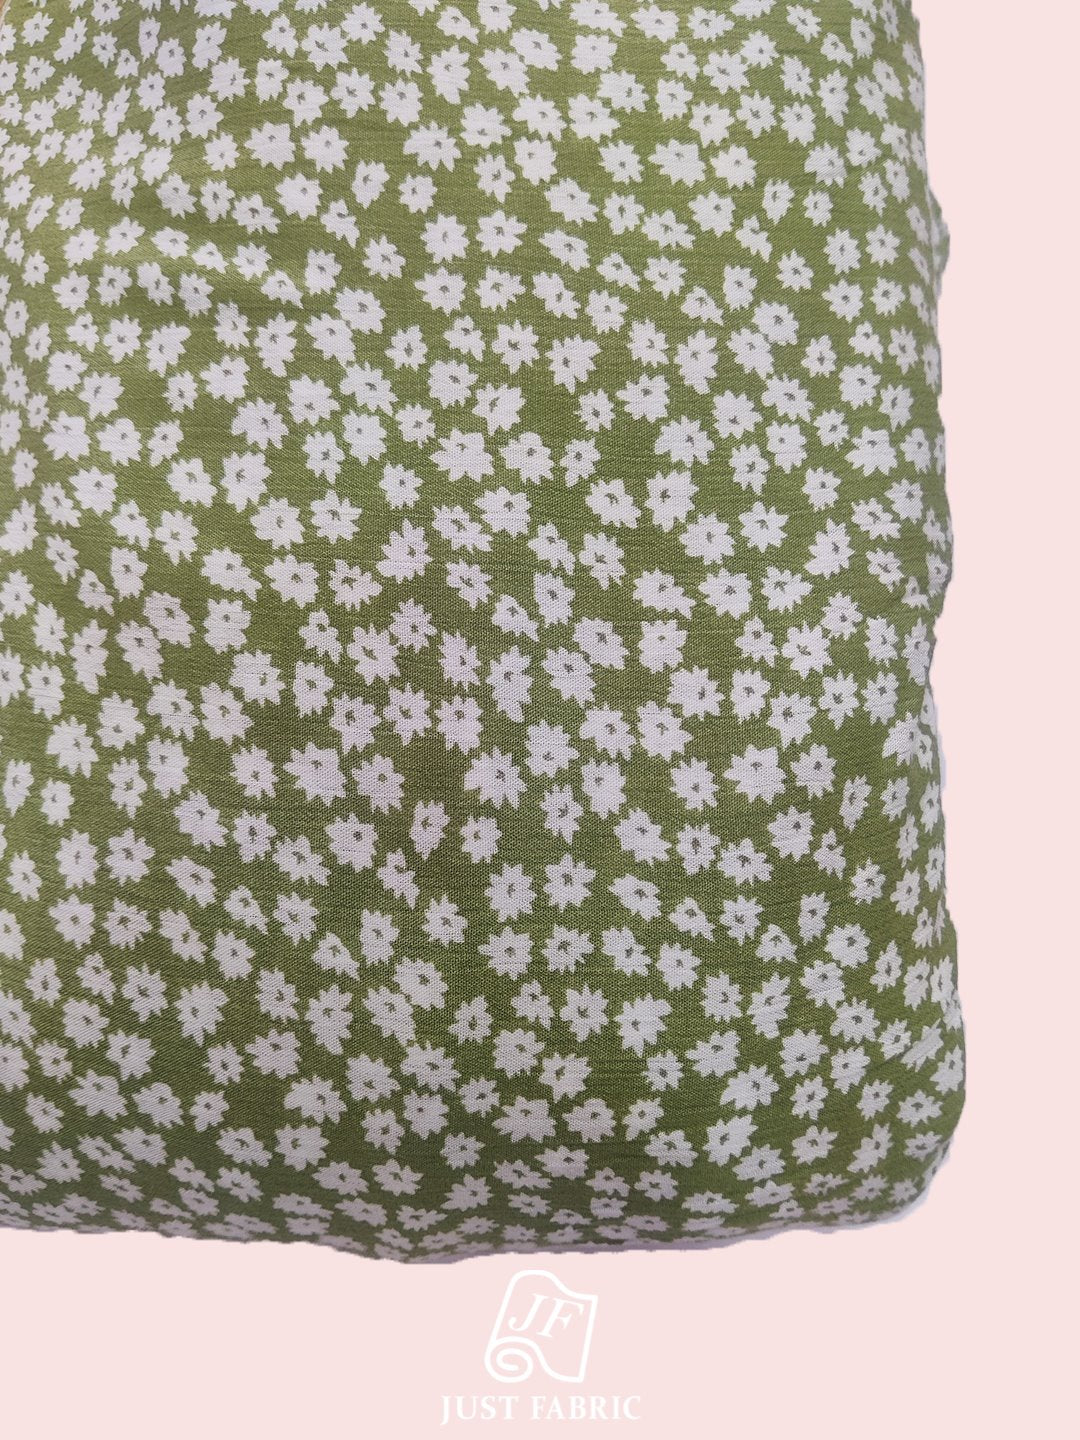 Floral Print All over on Rayon Cotton Fabric  ( 60" Inch Width) JUST FABRIC